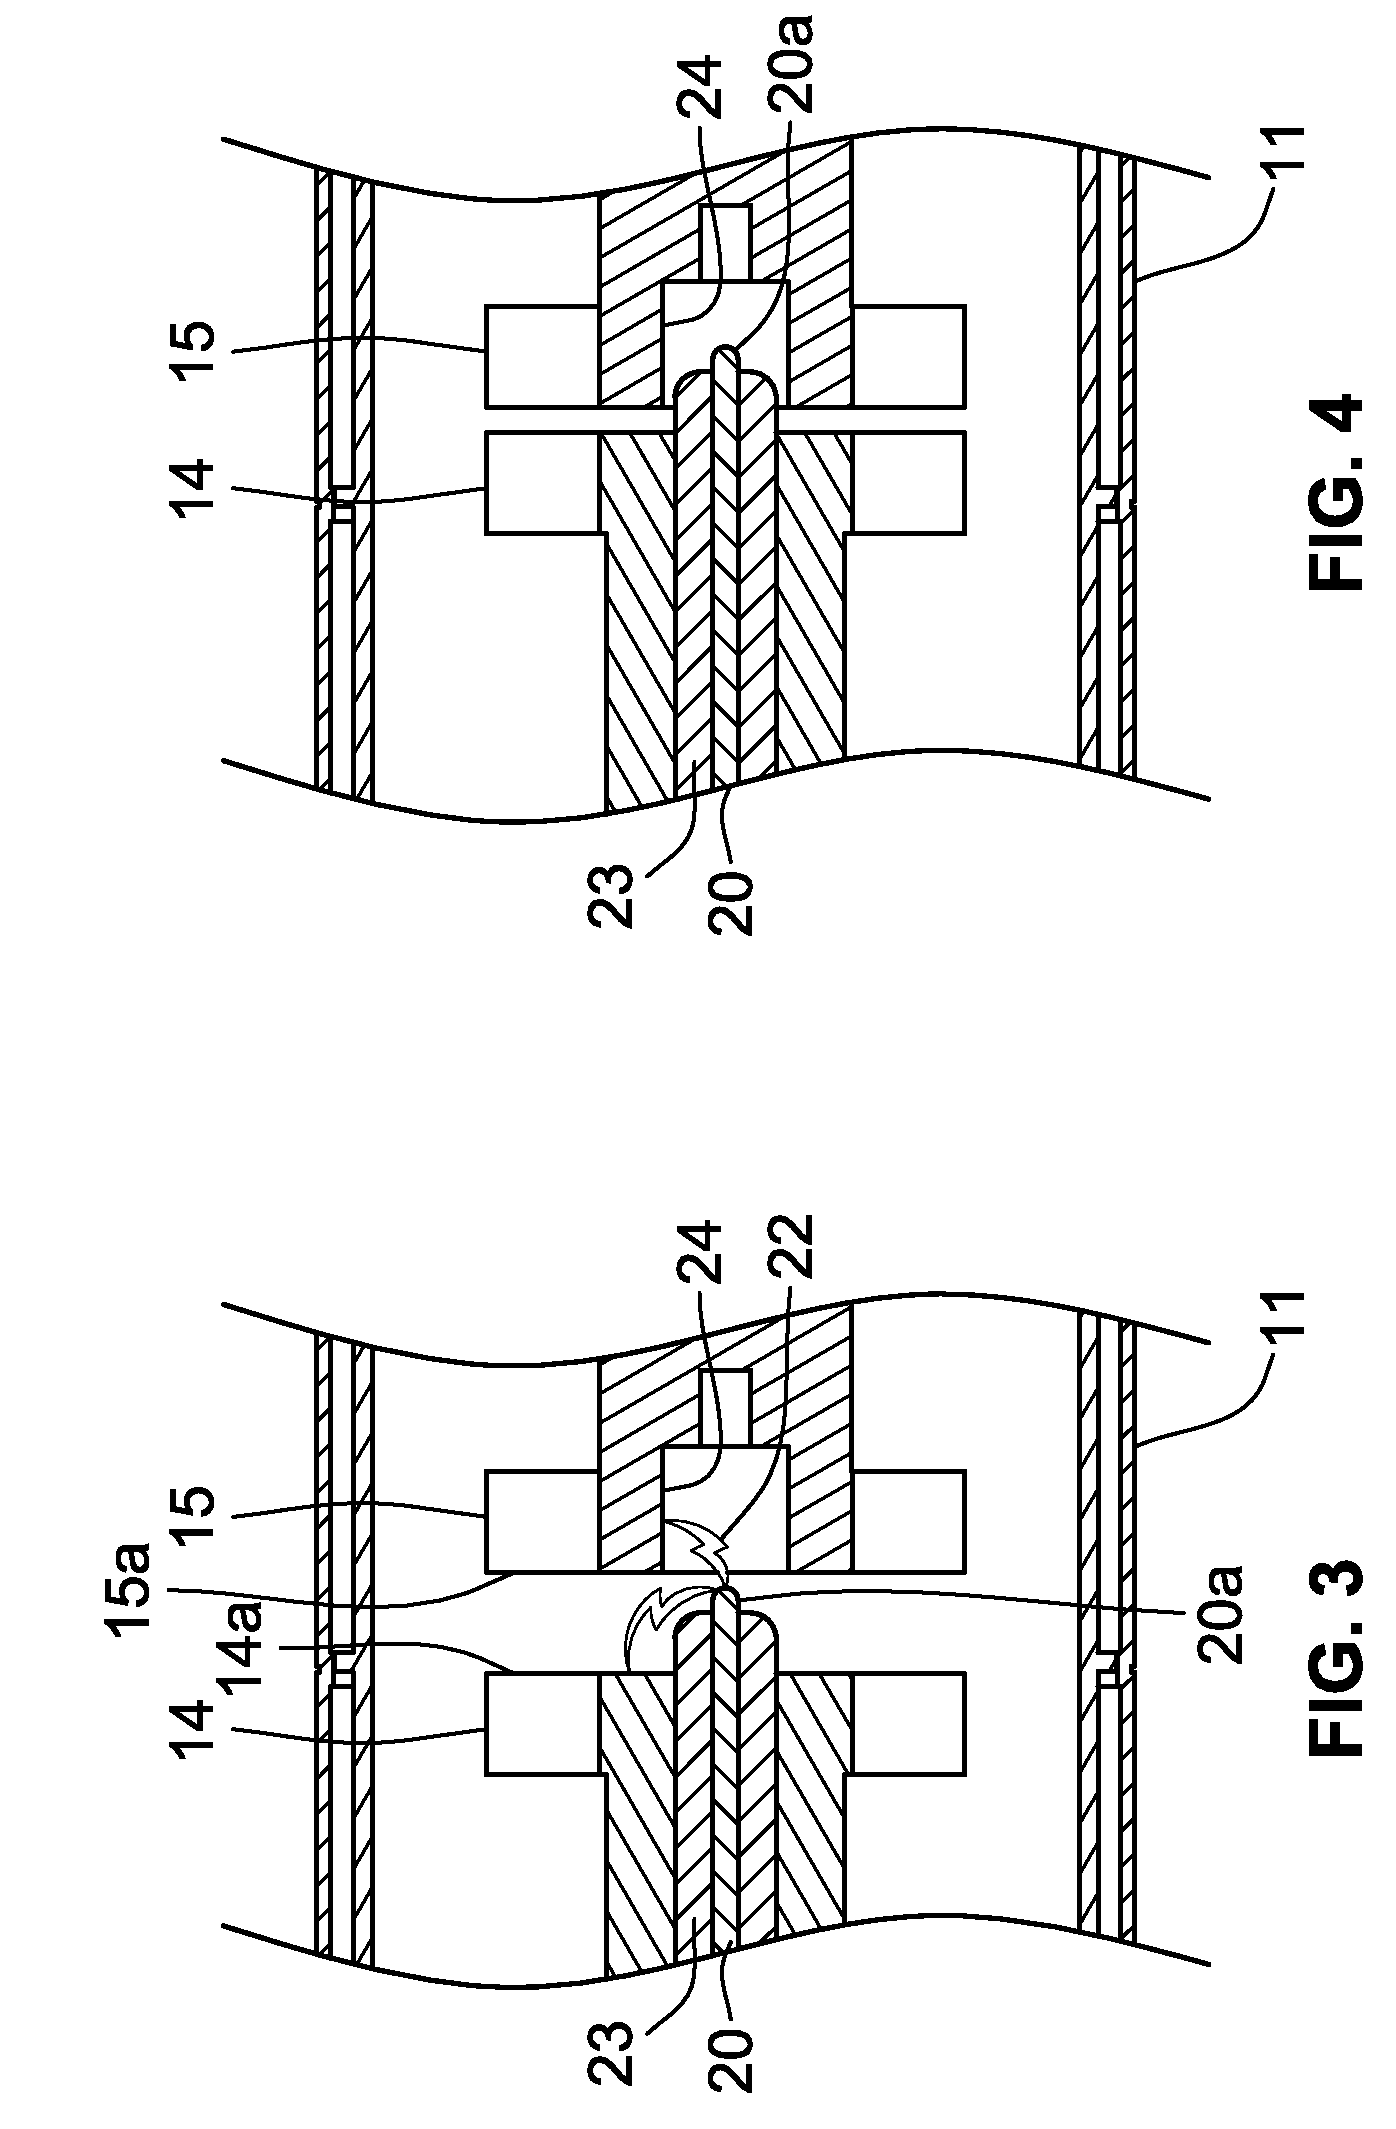 Arcing fault and arc flash protection system having a high-speed switch